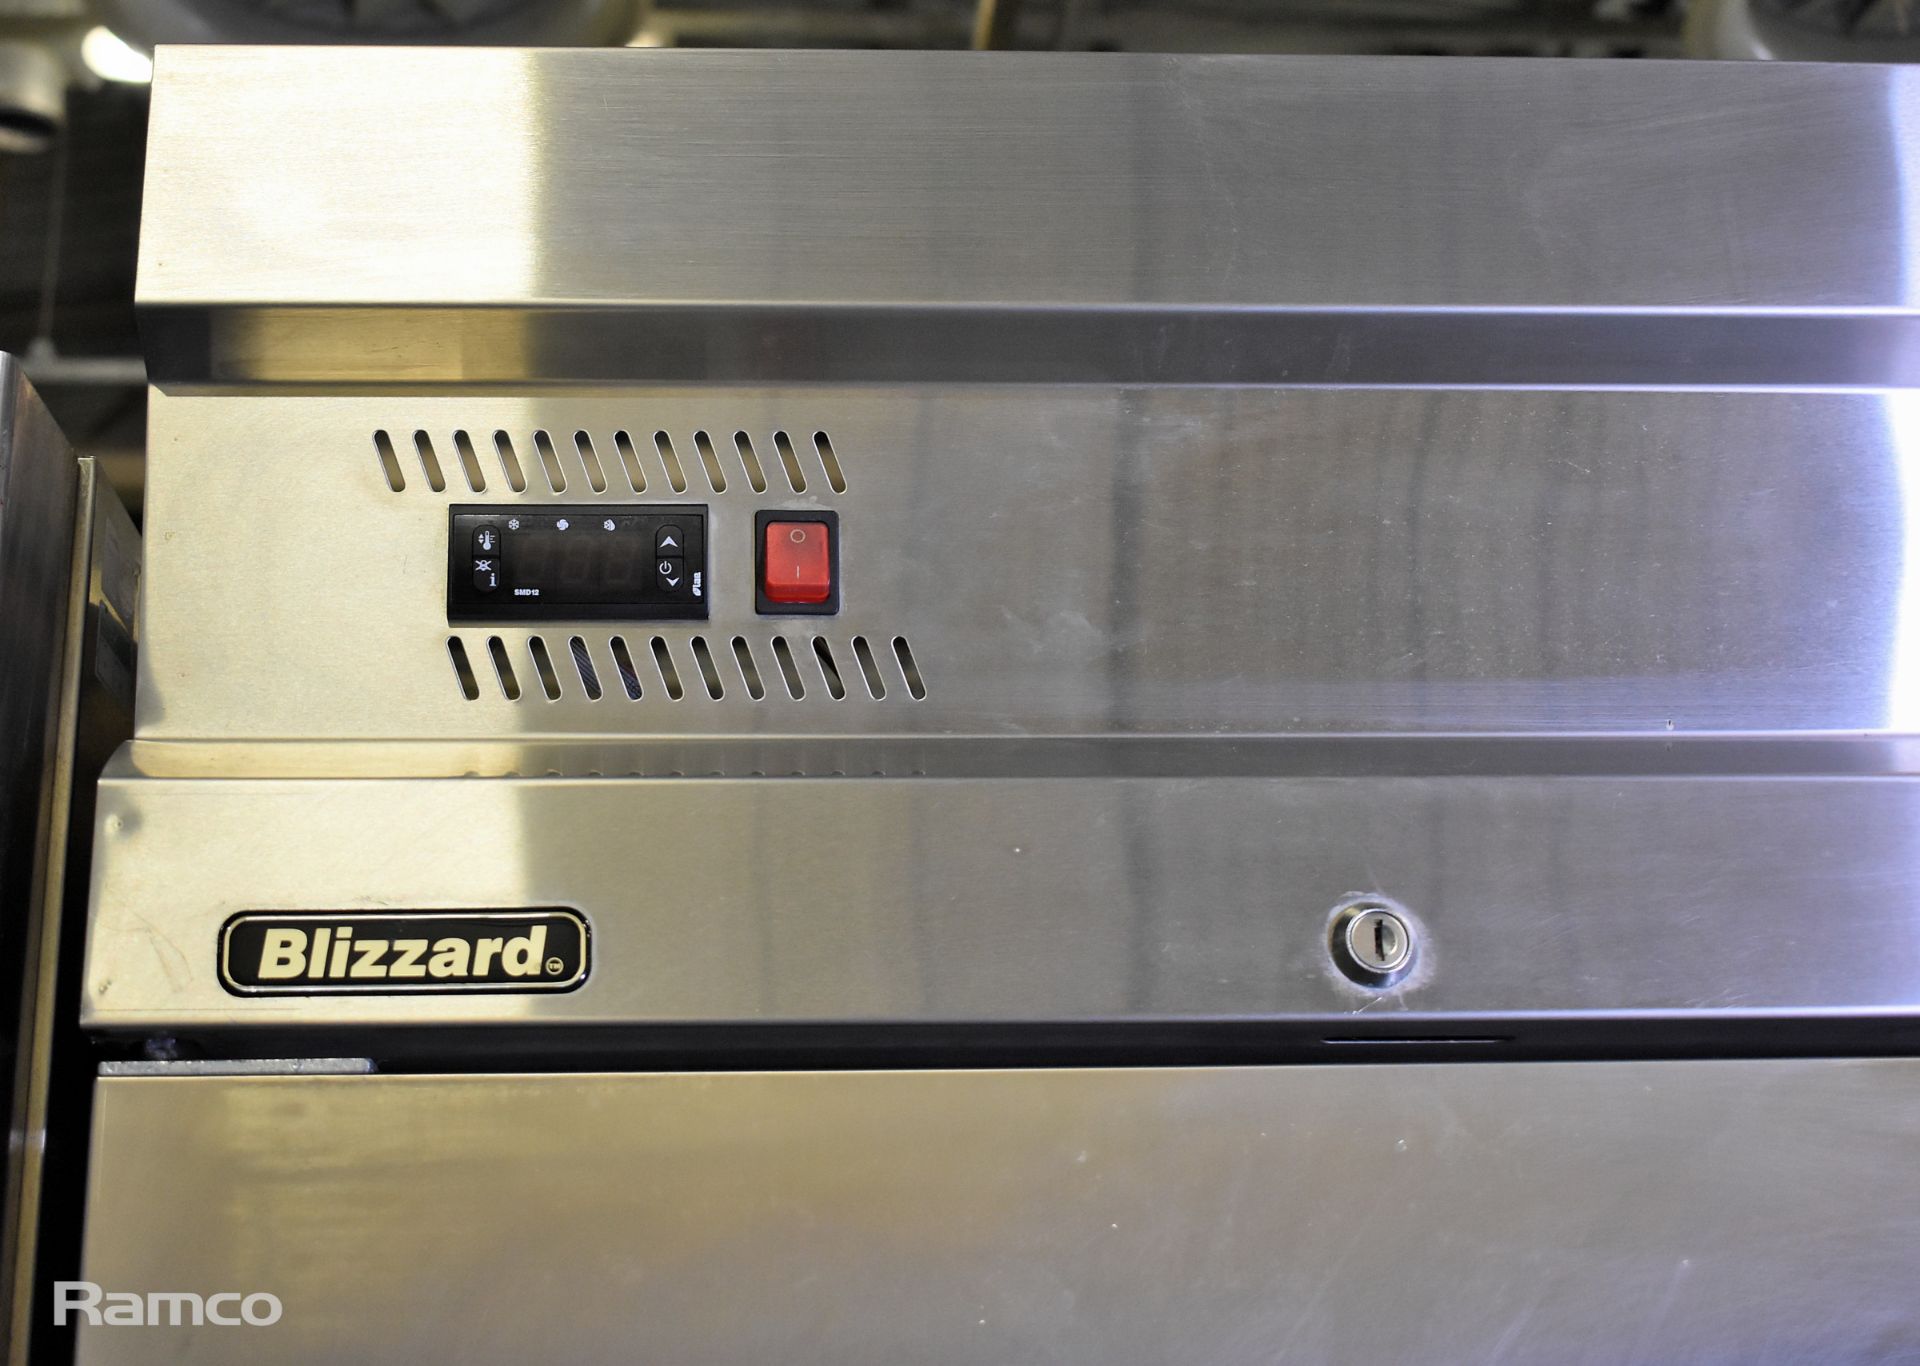 Blizzard stainless steel double door upright freezer - W 1400 x D 850 x H 2090mm - Image 5 of 8